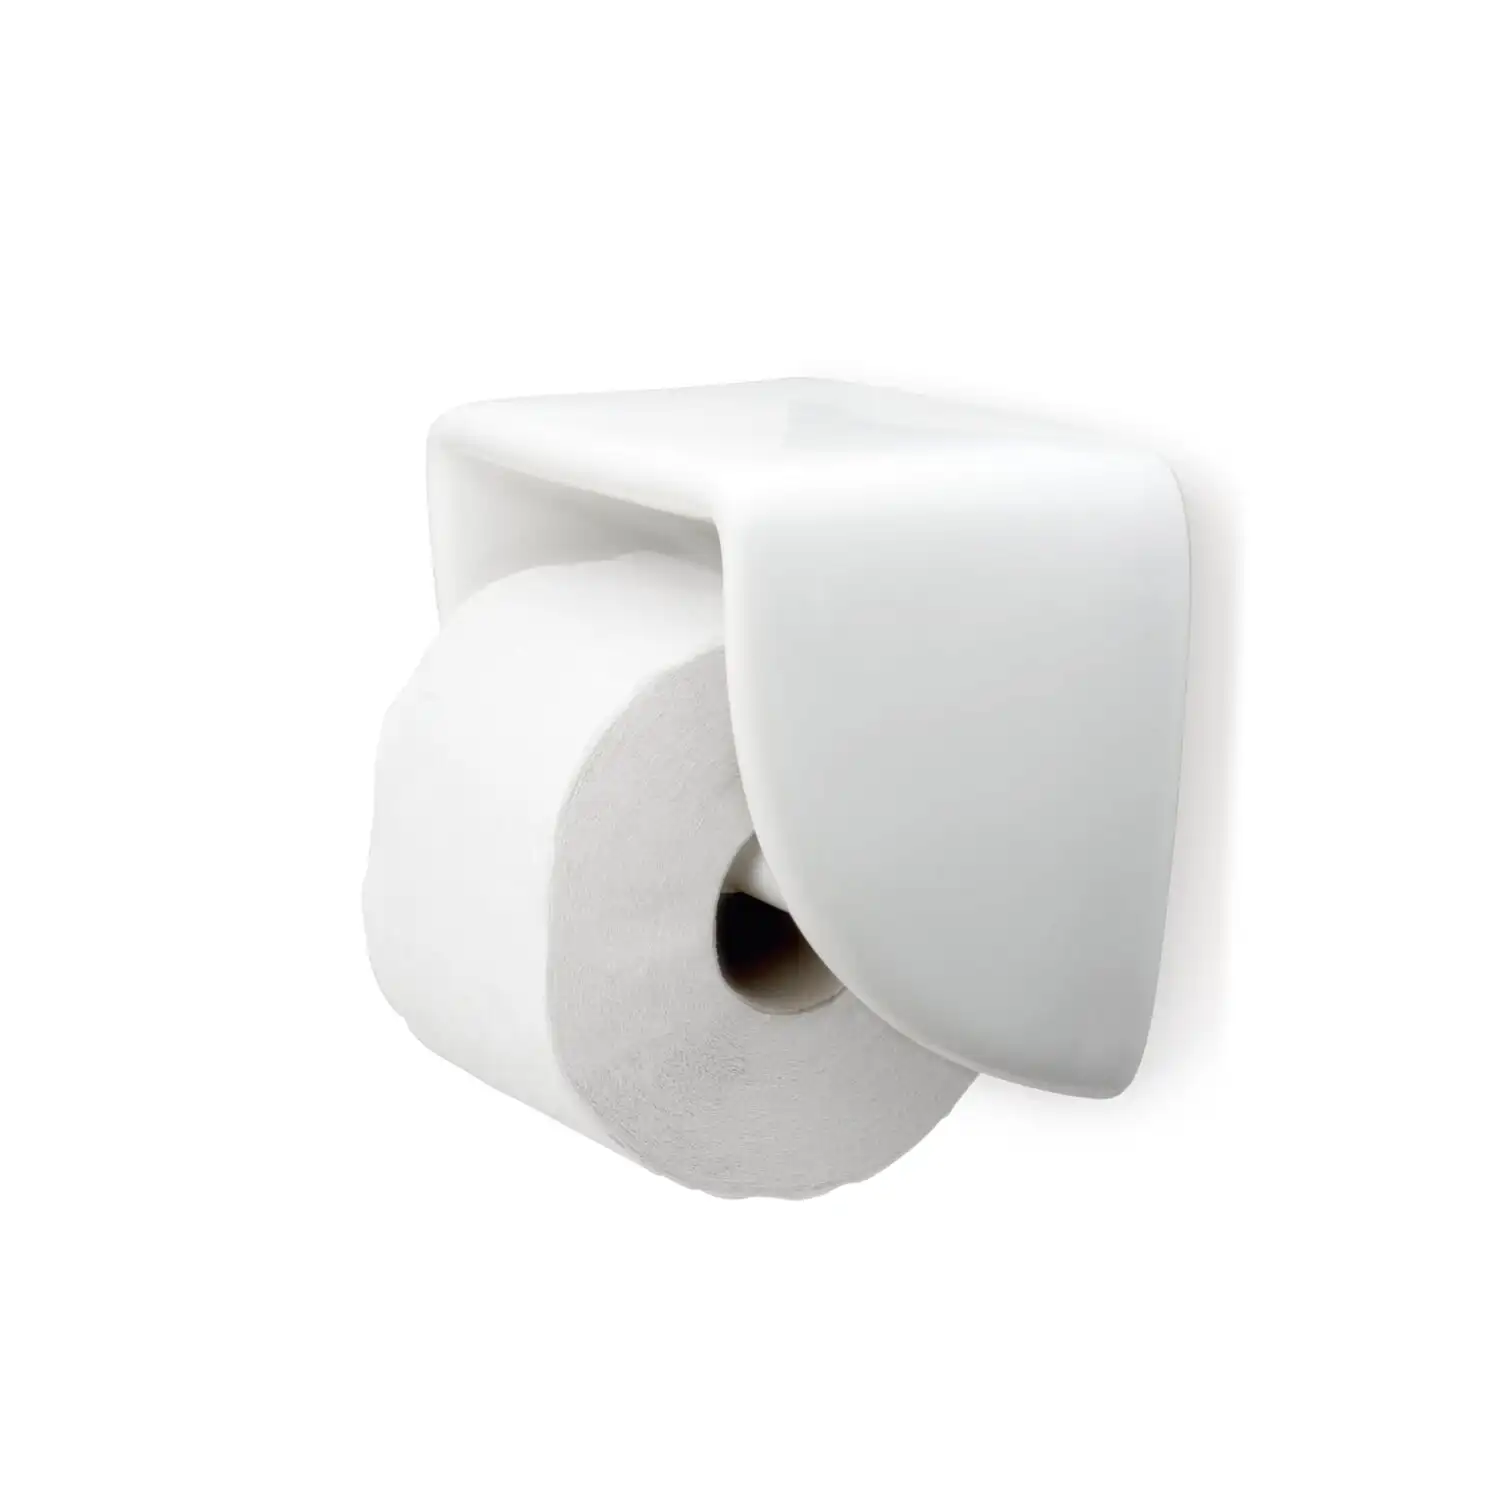 Details about   White ceramic towel bar/toilet paper holders 